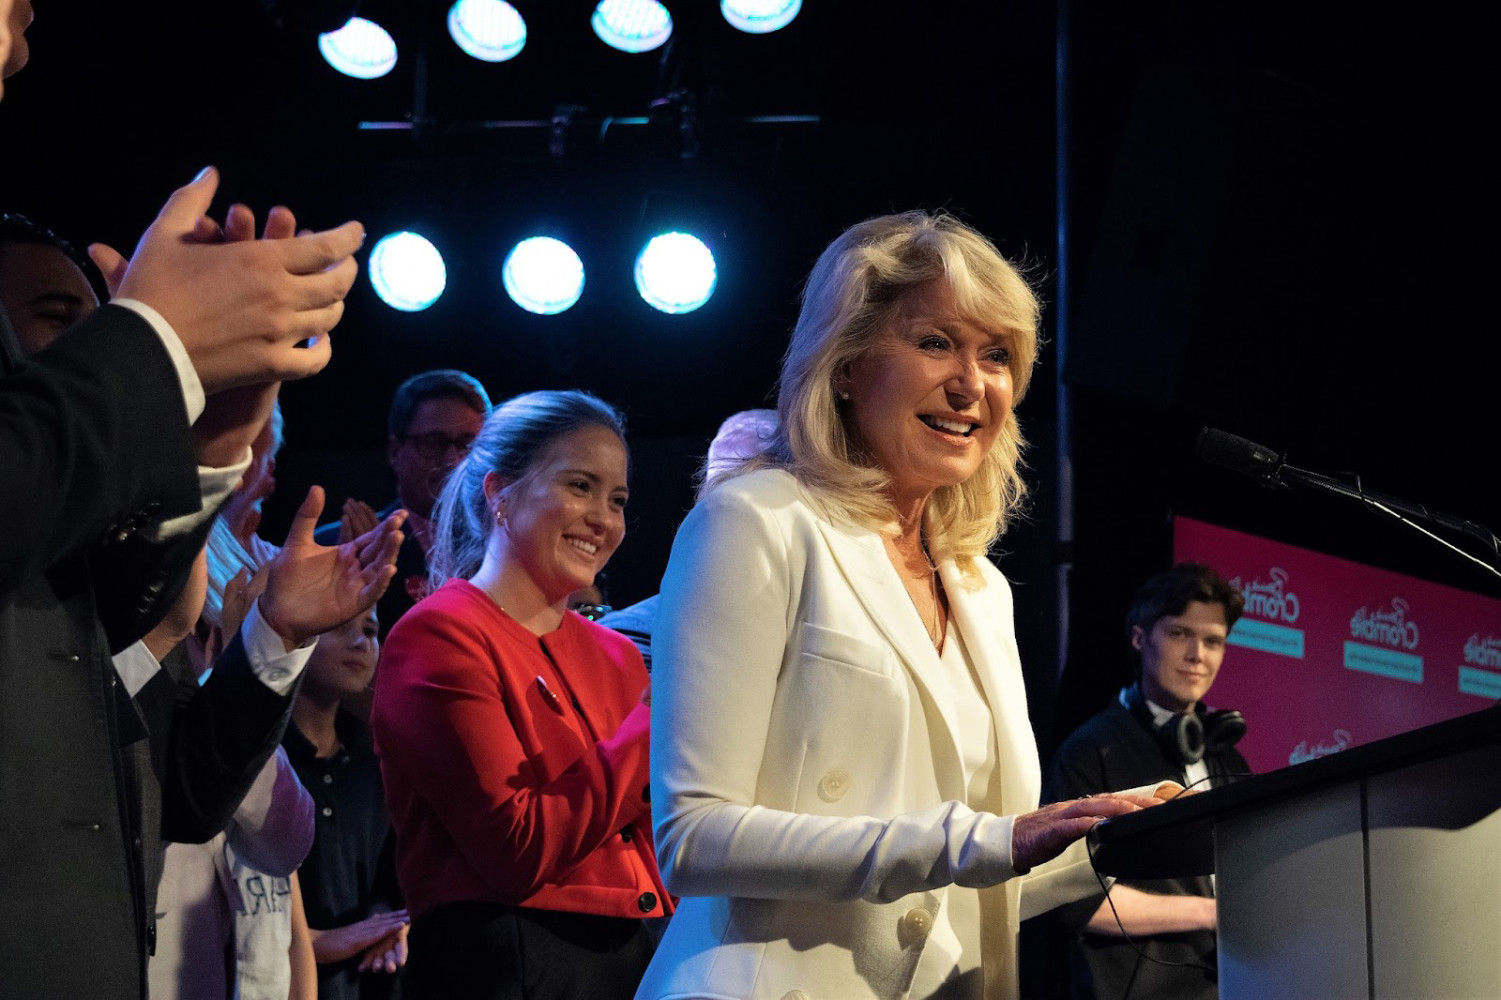 Two months into her province-wide campaign for the Liberal leadership, Bonnie Crombie still won’t say when she plans to step away from the mayor’s seat